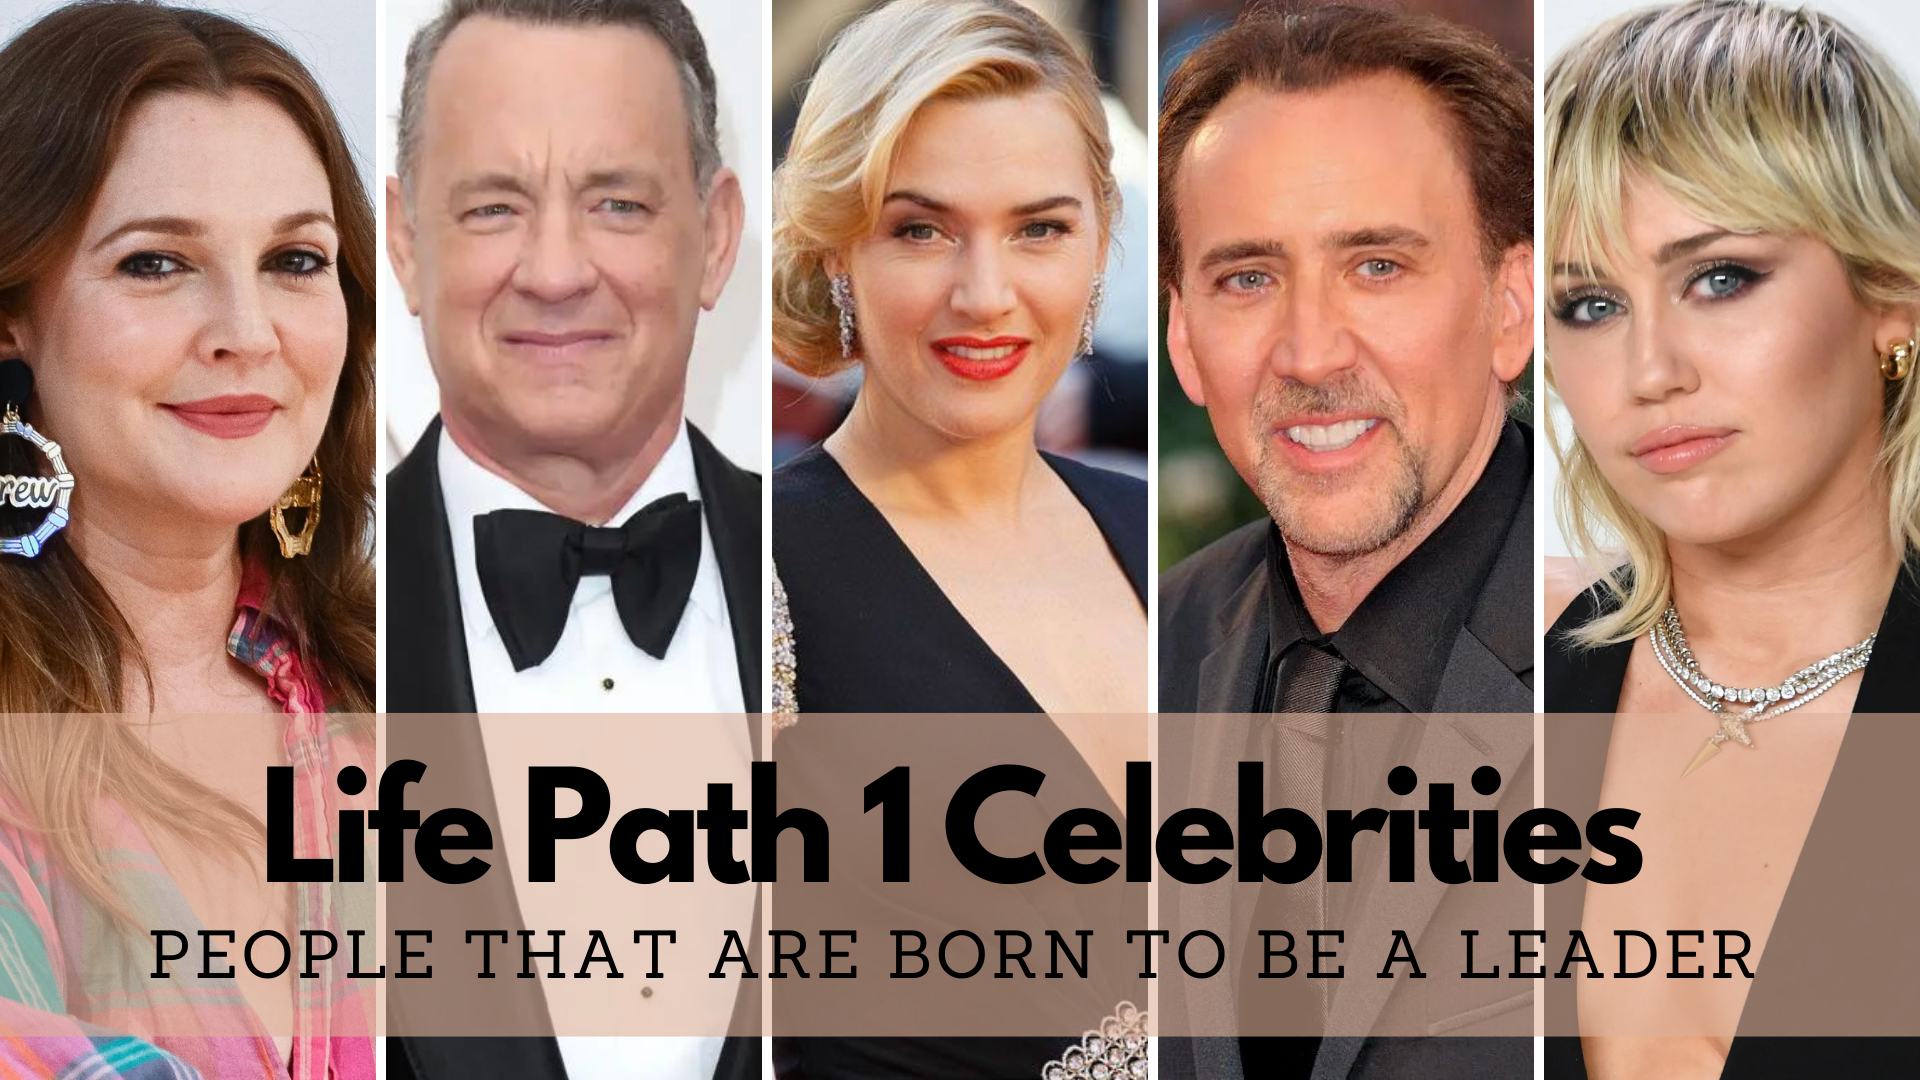 Life Path 1 Celebrities - People That Are Born To Be A Leader